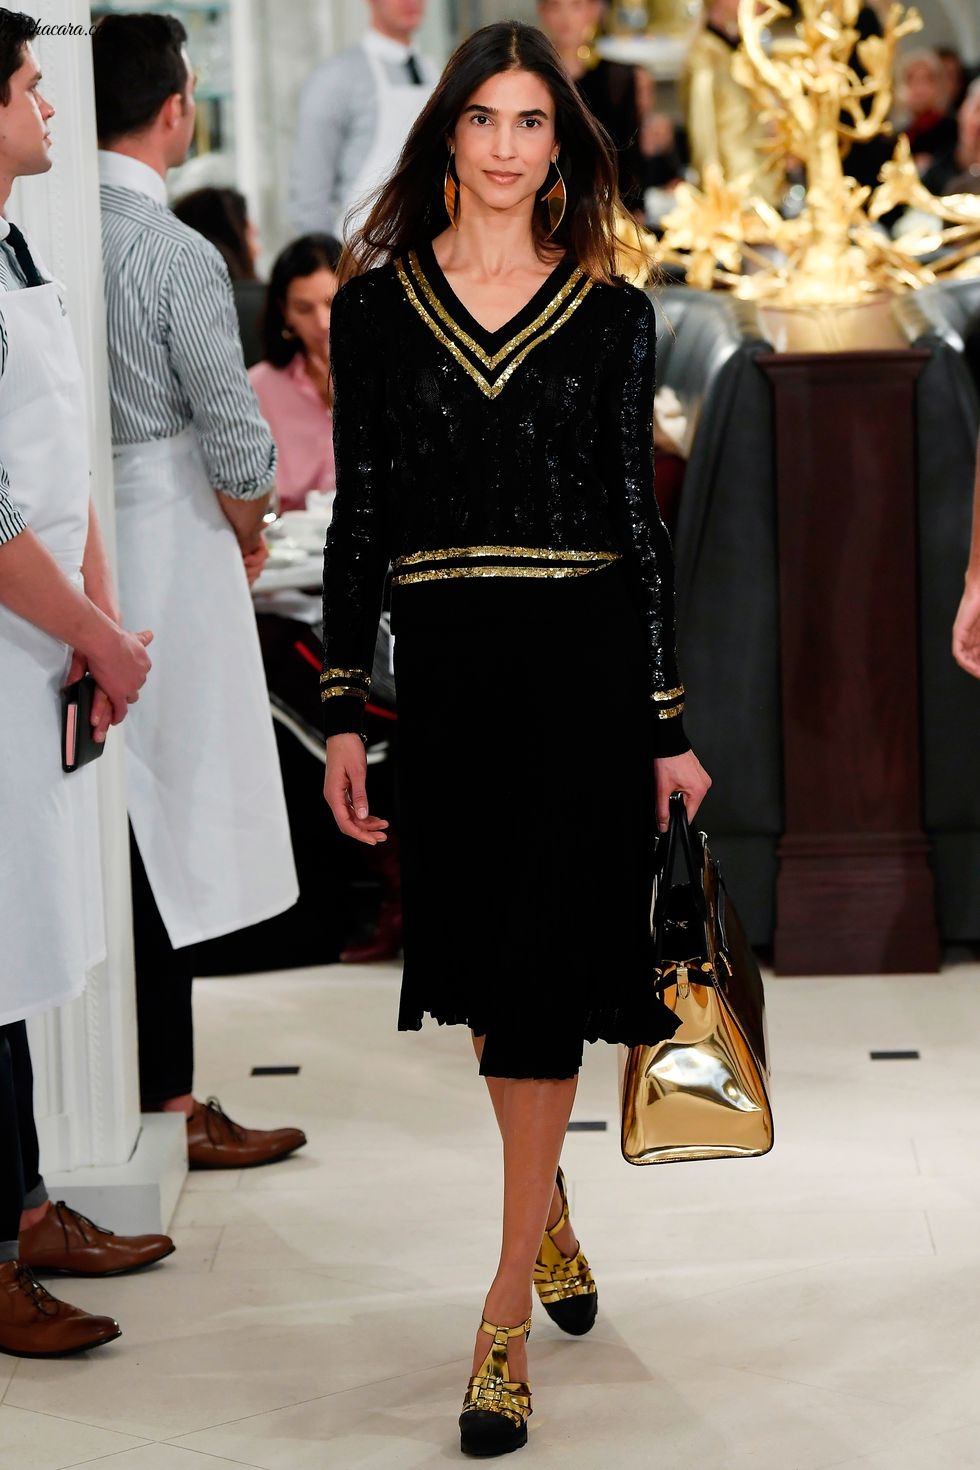 #NYFW: Gold Sequins, Metallics And Pleats Were The Order Of The Day At Ralph Lauren